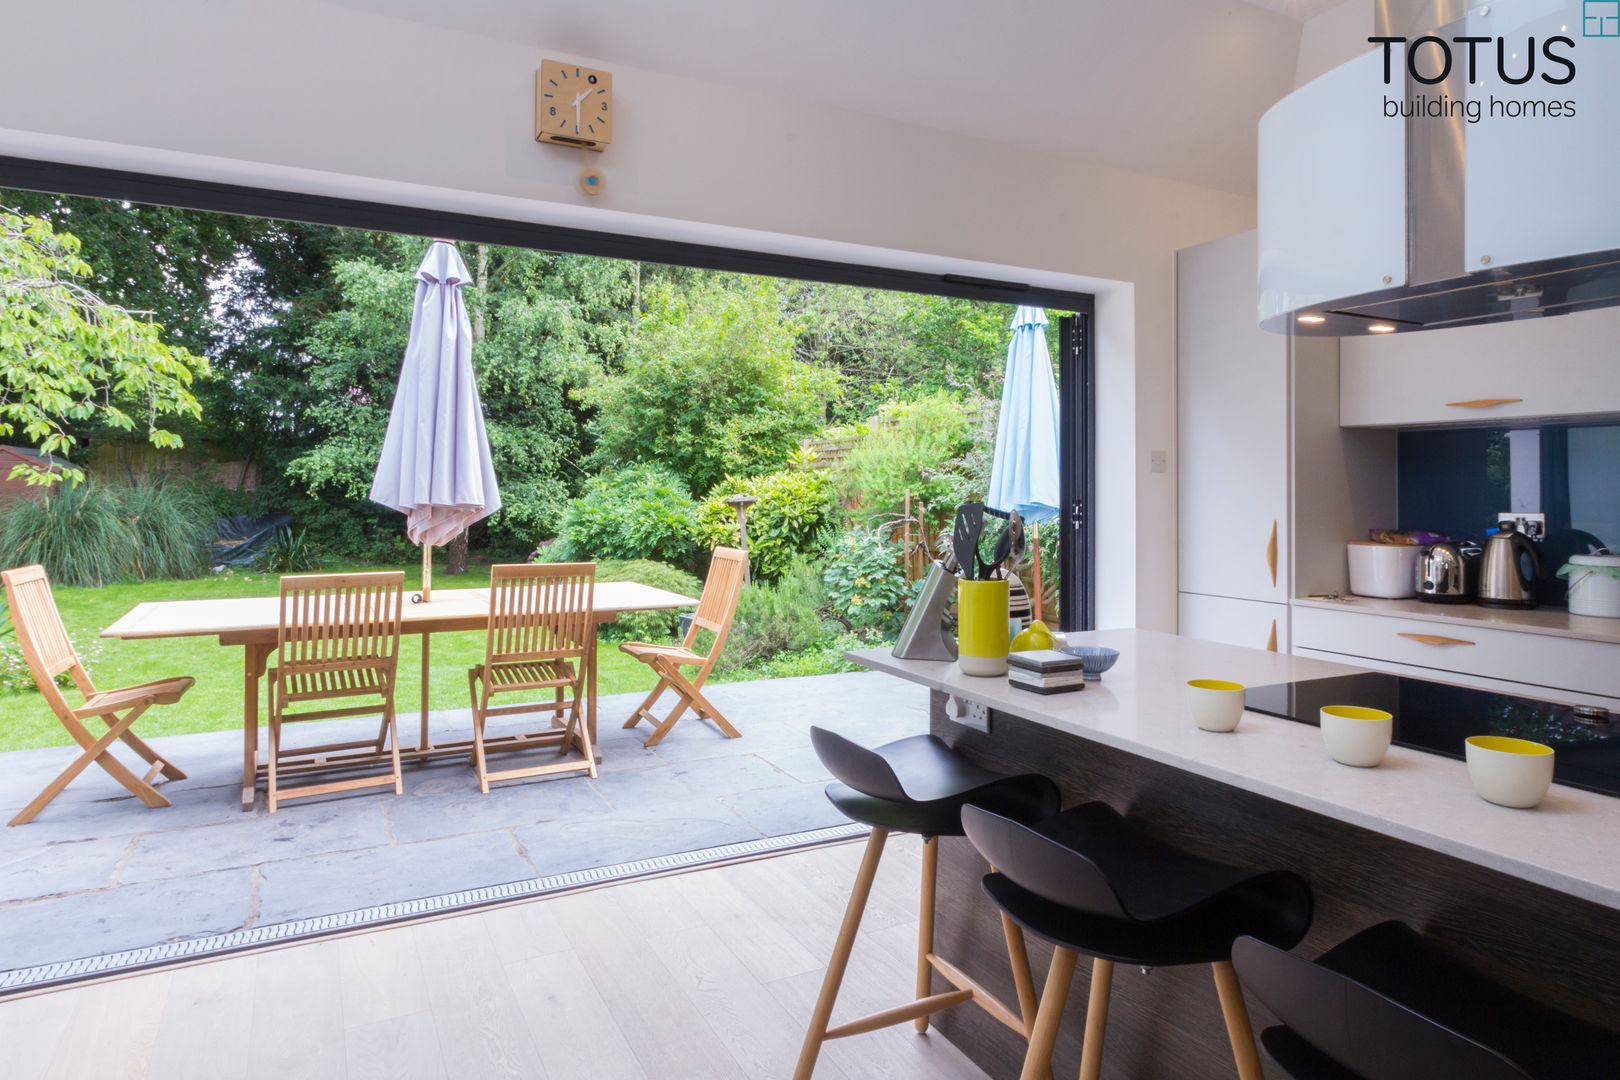 New life for a 1920s home - extension and full renovation, Thames Ditton, Surrey, TOTUS TOTUS Modern kitchen